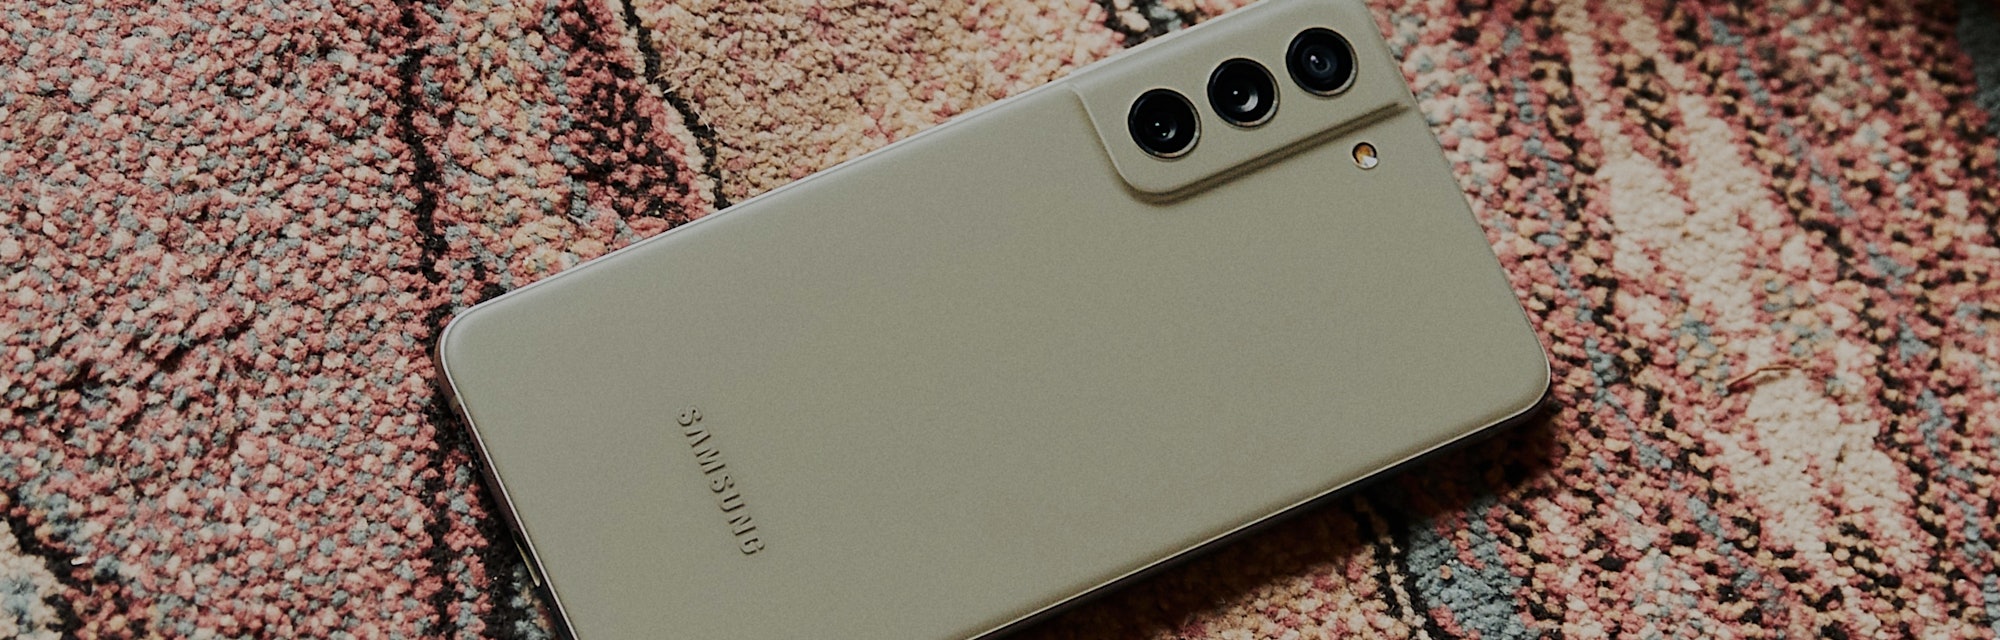 Samsung's Galaxy S21 FE 5G has a larger battery and 32-megapixel selfie cam